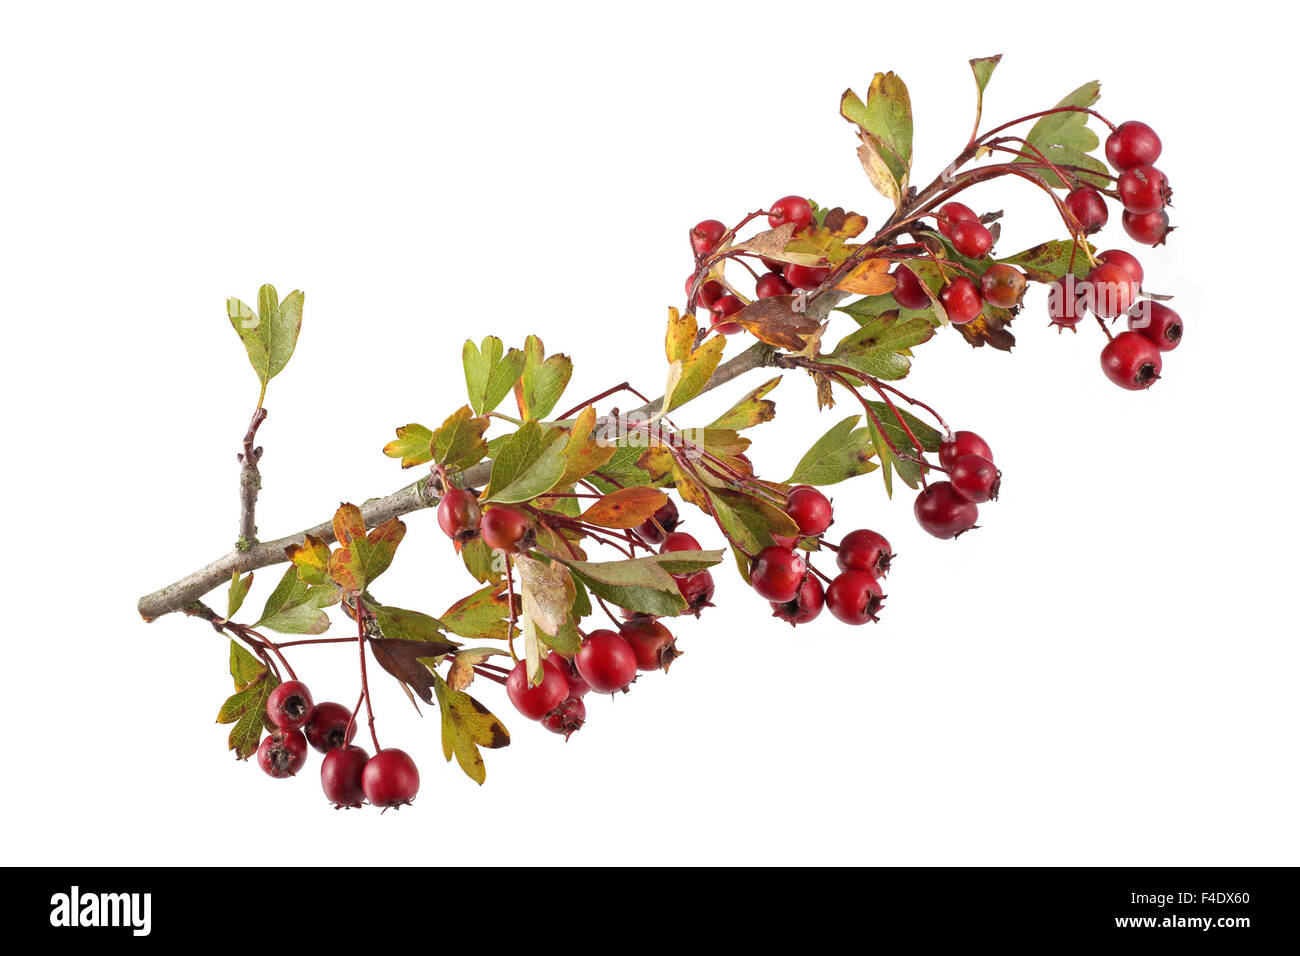 Hawthorn seeds and leaves on a plain white background. Stock Photo